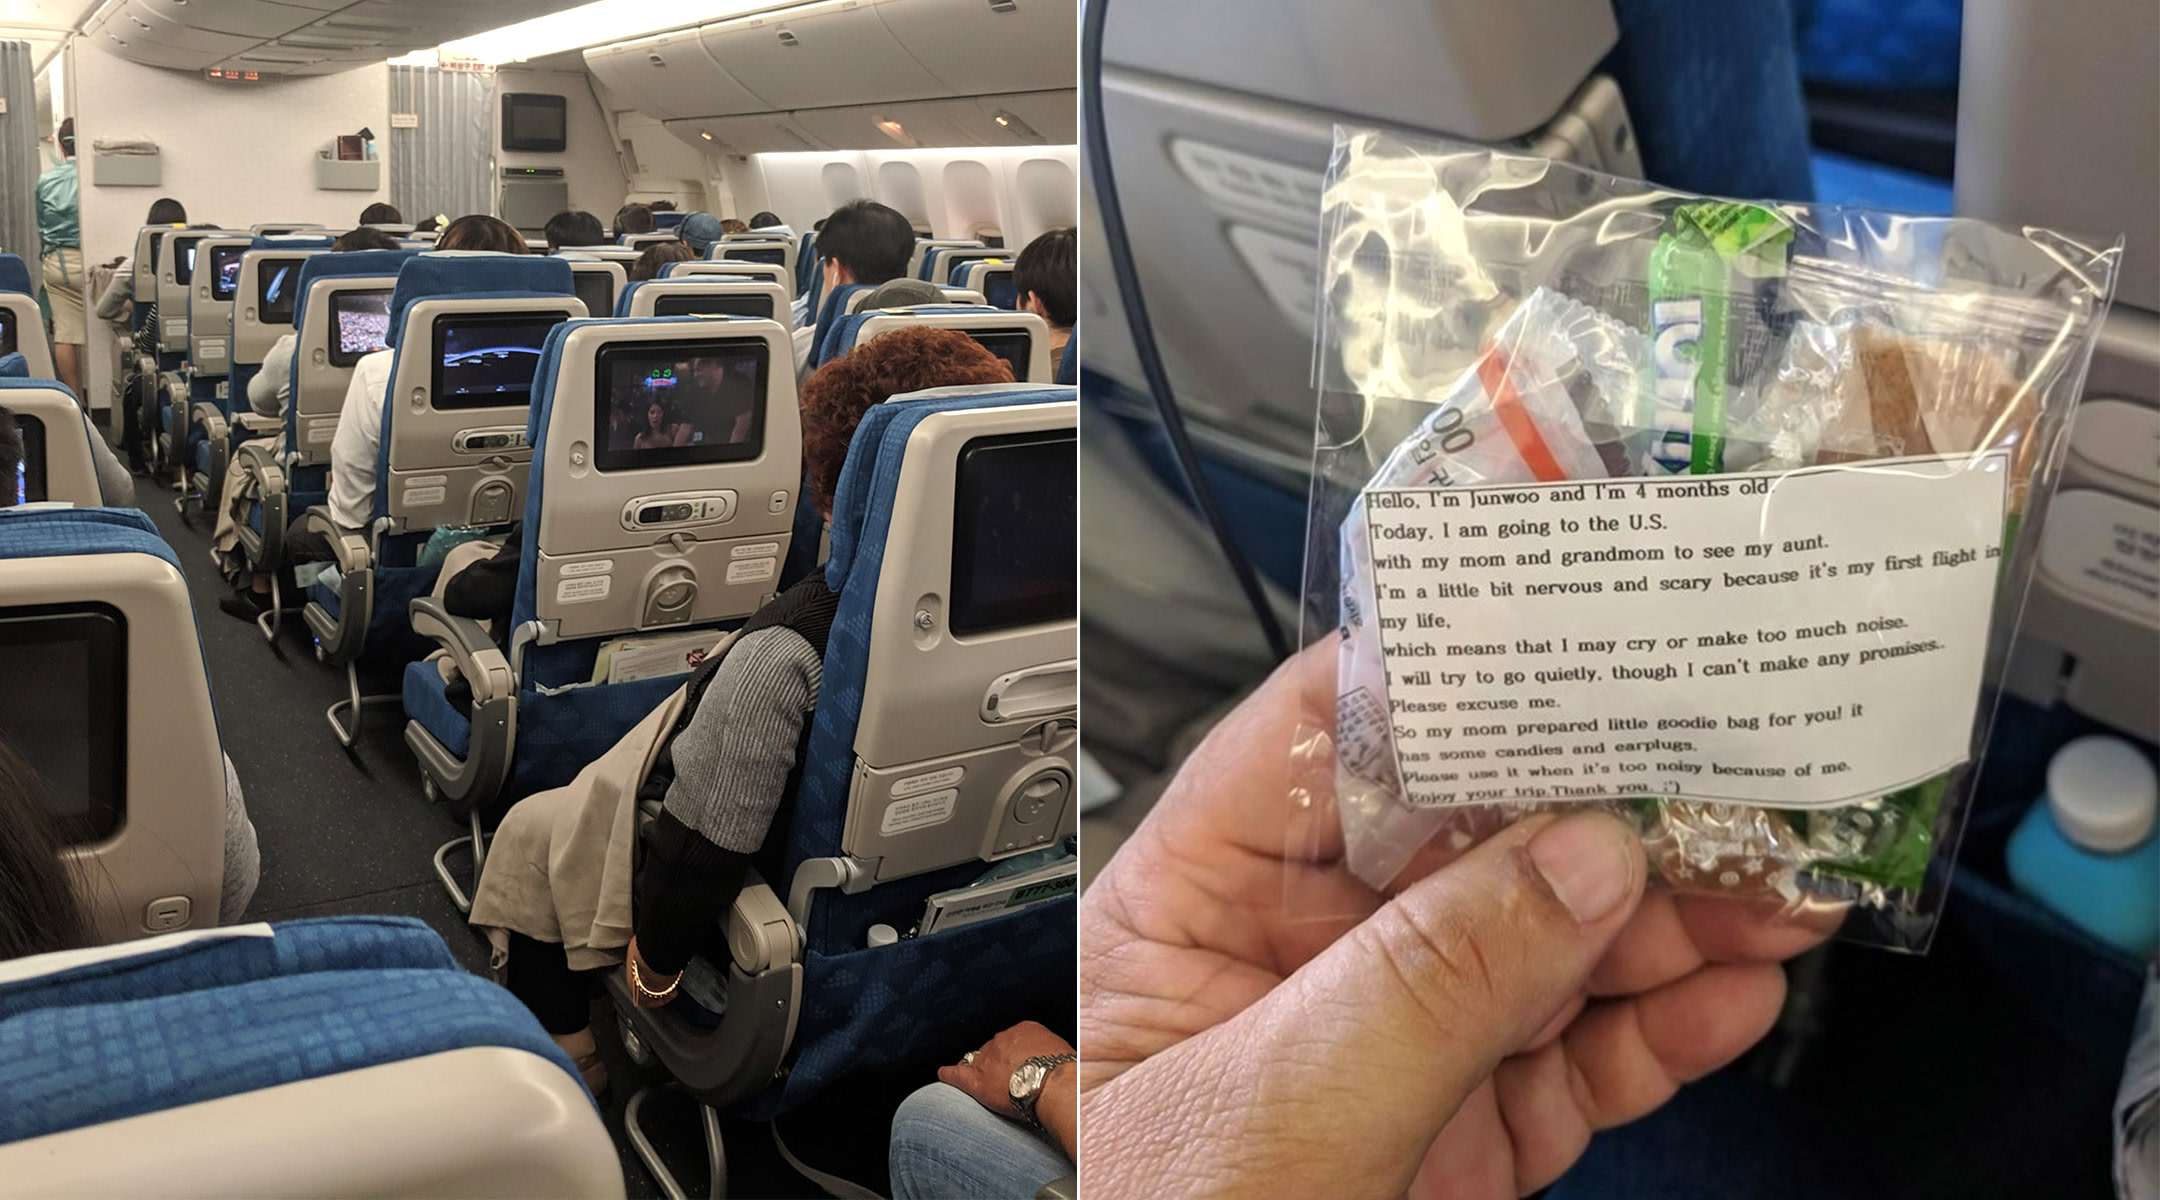 mom hands out care bags in case her baby cries on long flight